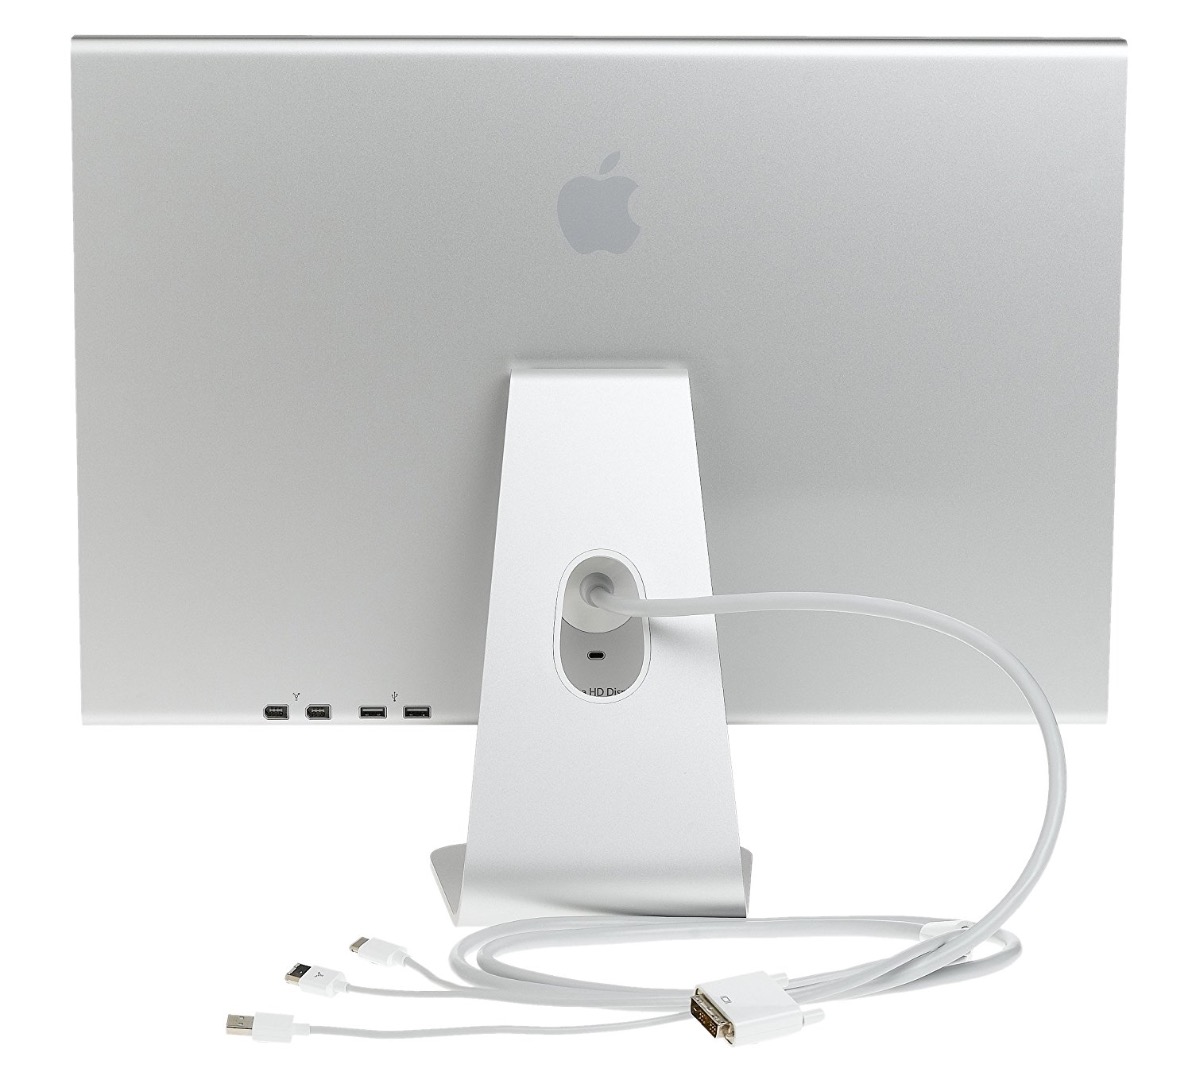 2017 iMac 27 connecting to external displ… - Apple Community